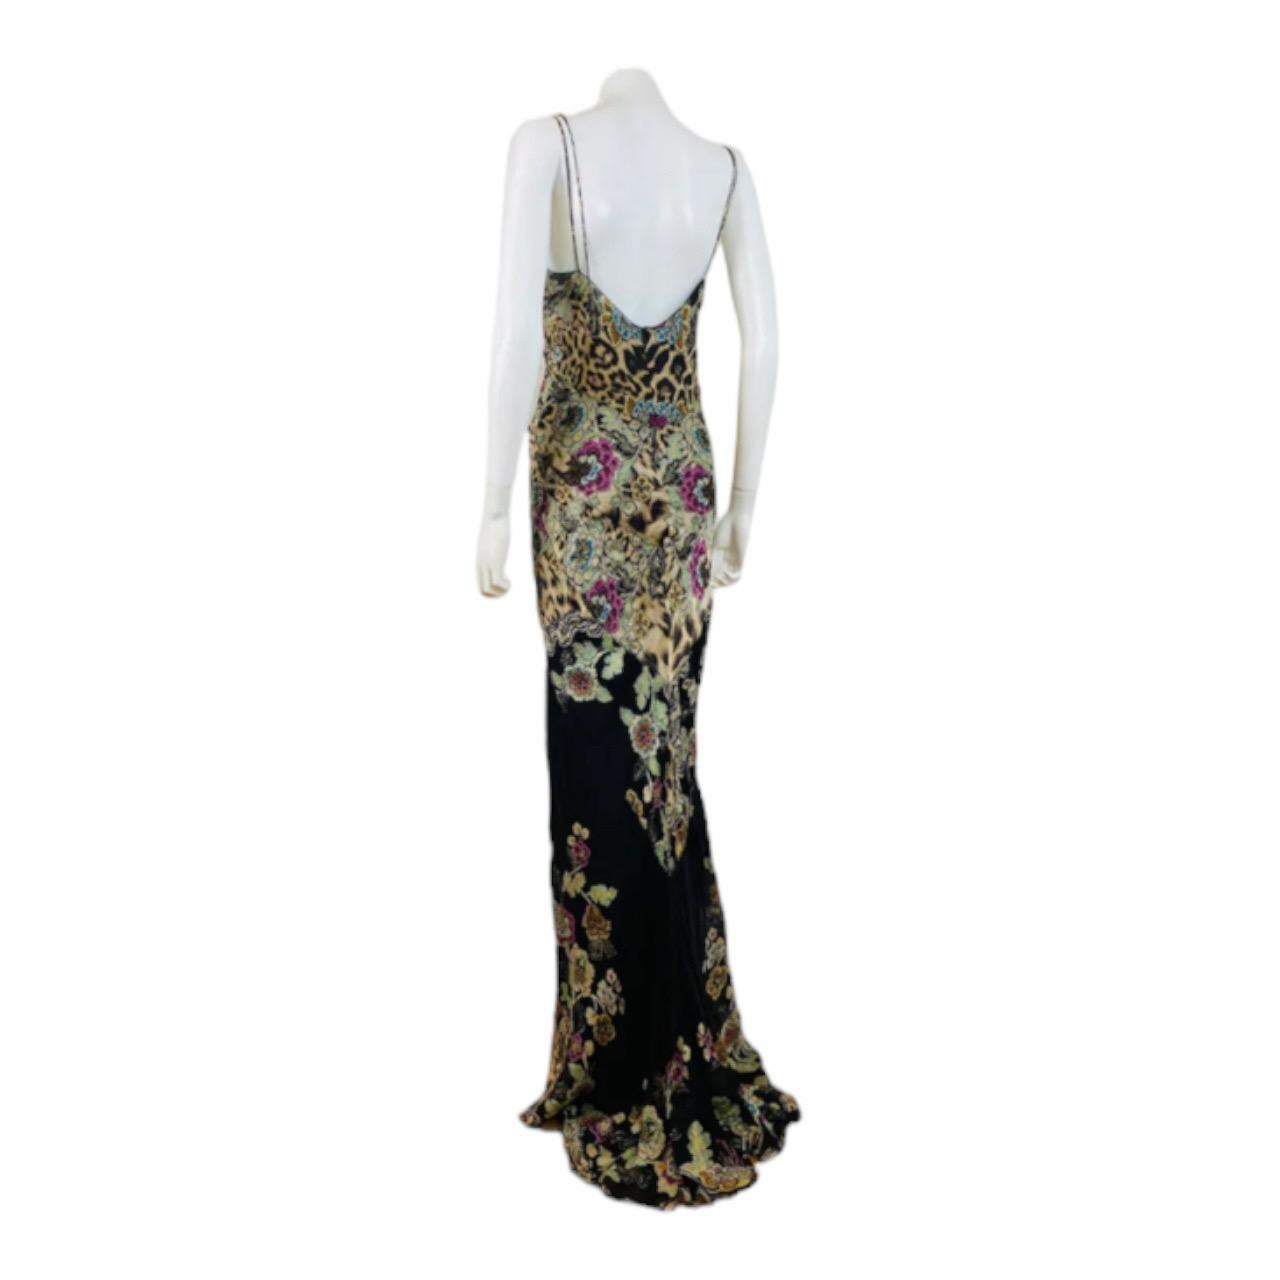 Vintage S/S 2003 Roberto Cavalli Black Chinoiserie Leopard Floral Dress Gown For Sale 2